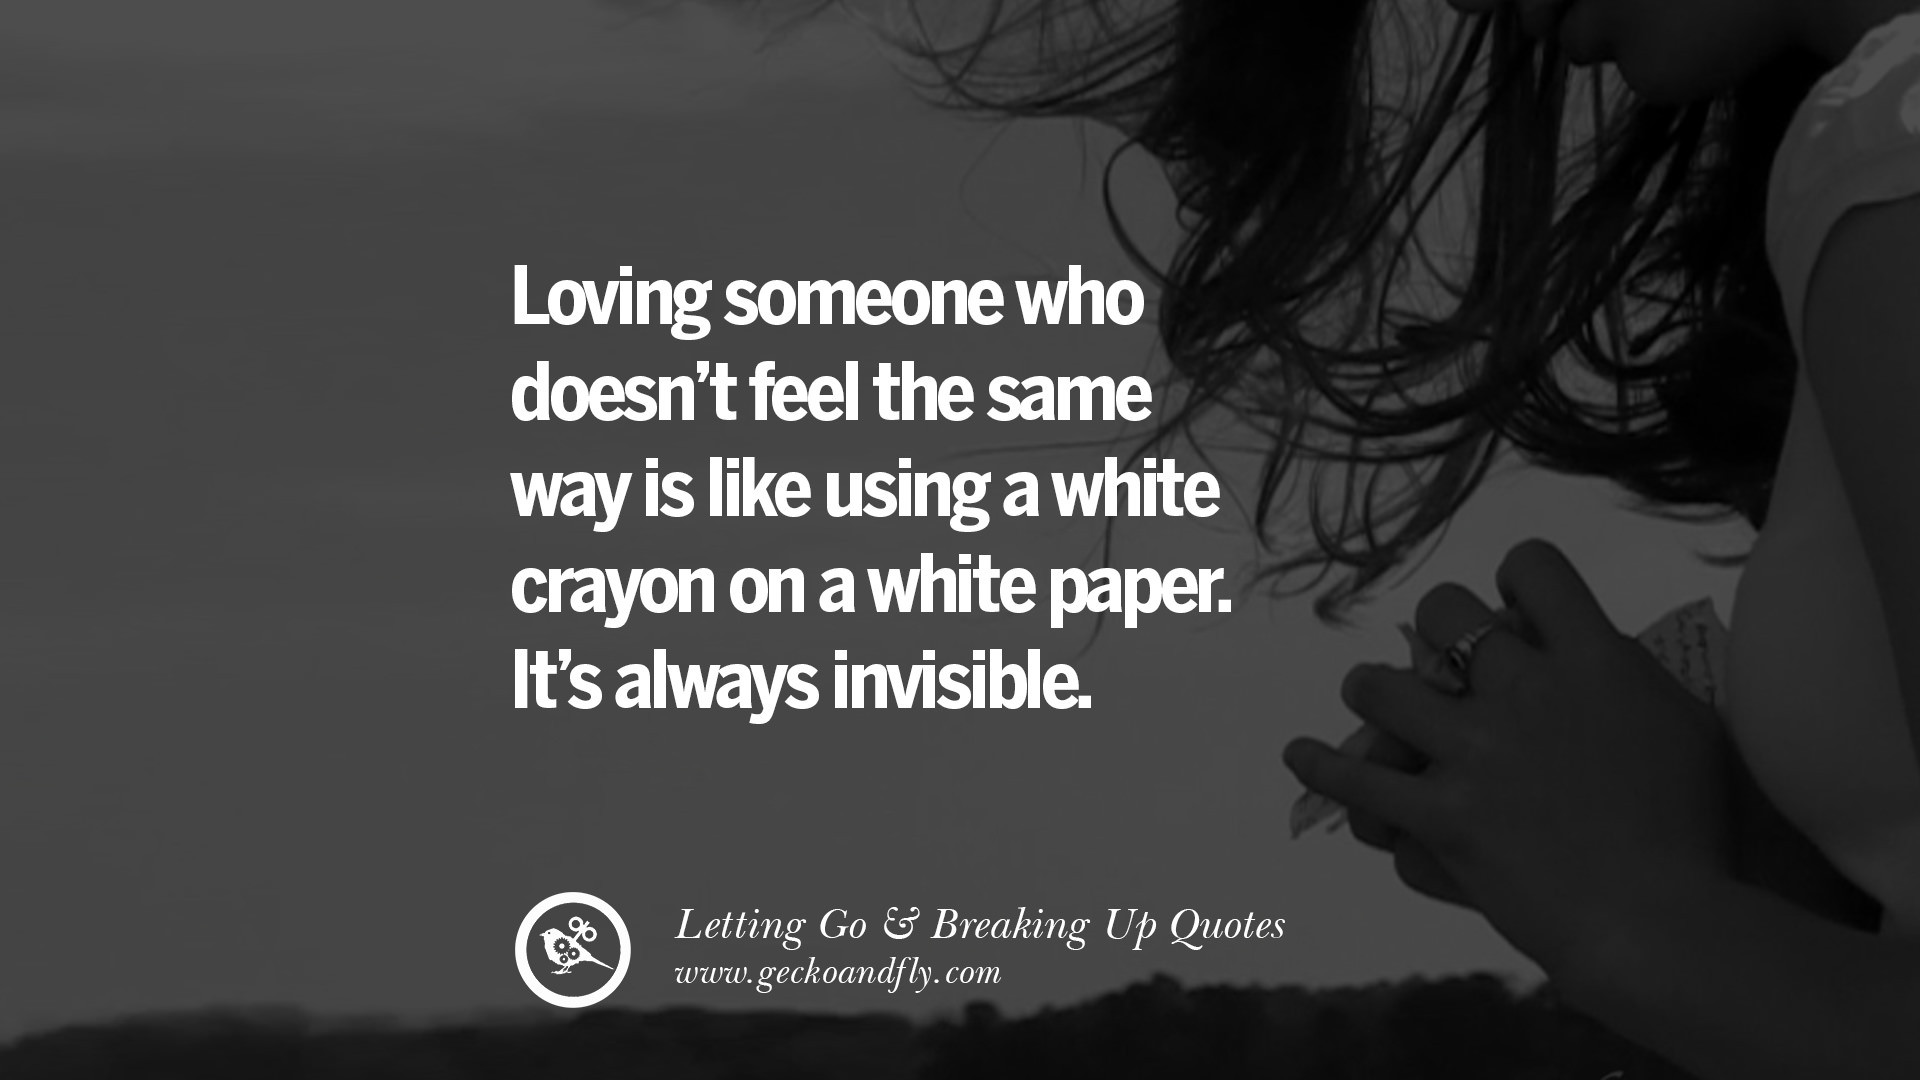 Letting Go Of A Relationship Quotes
 20 Encouraging Quotes About Moving Forward From A Bad